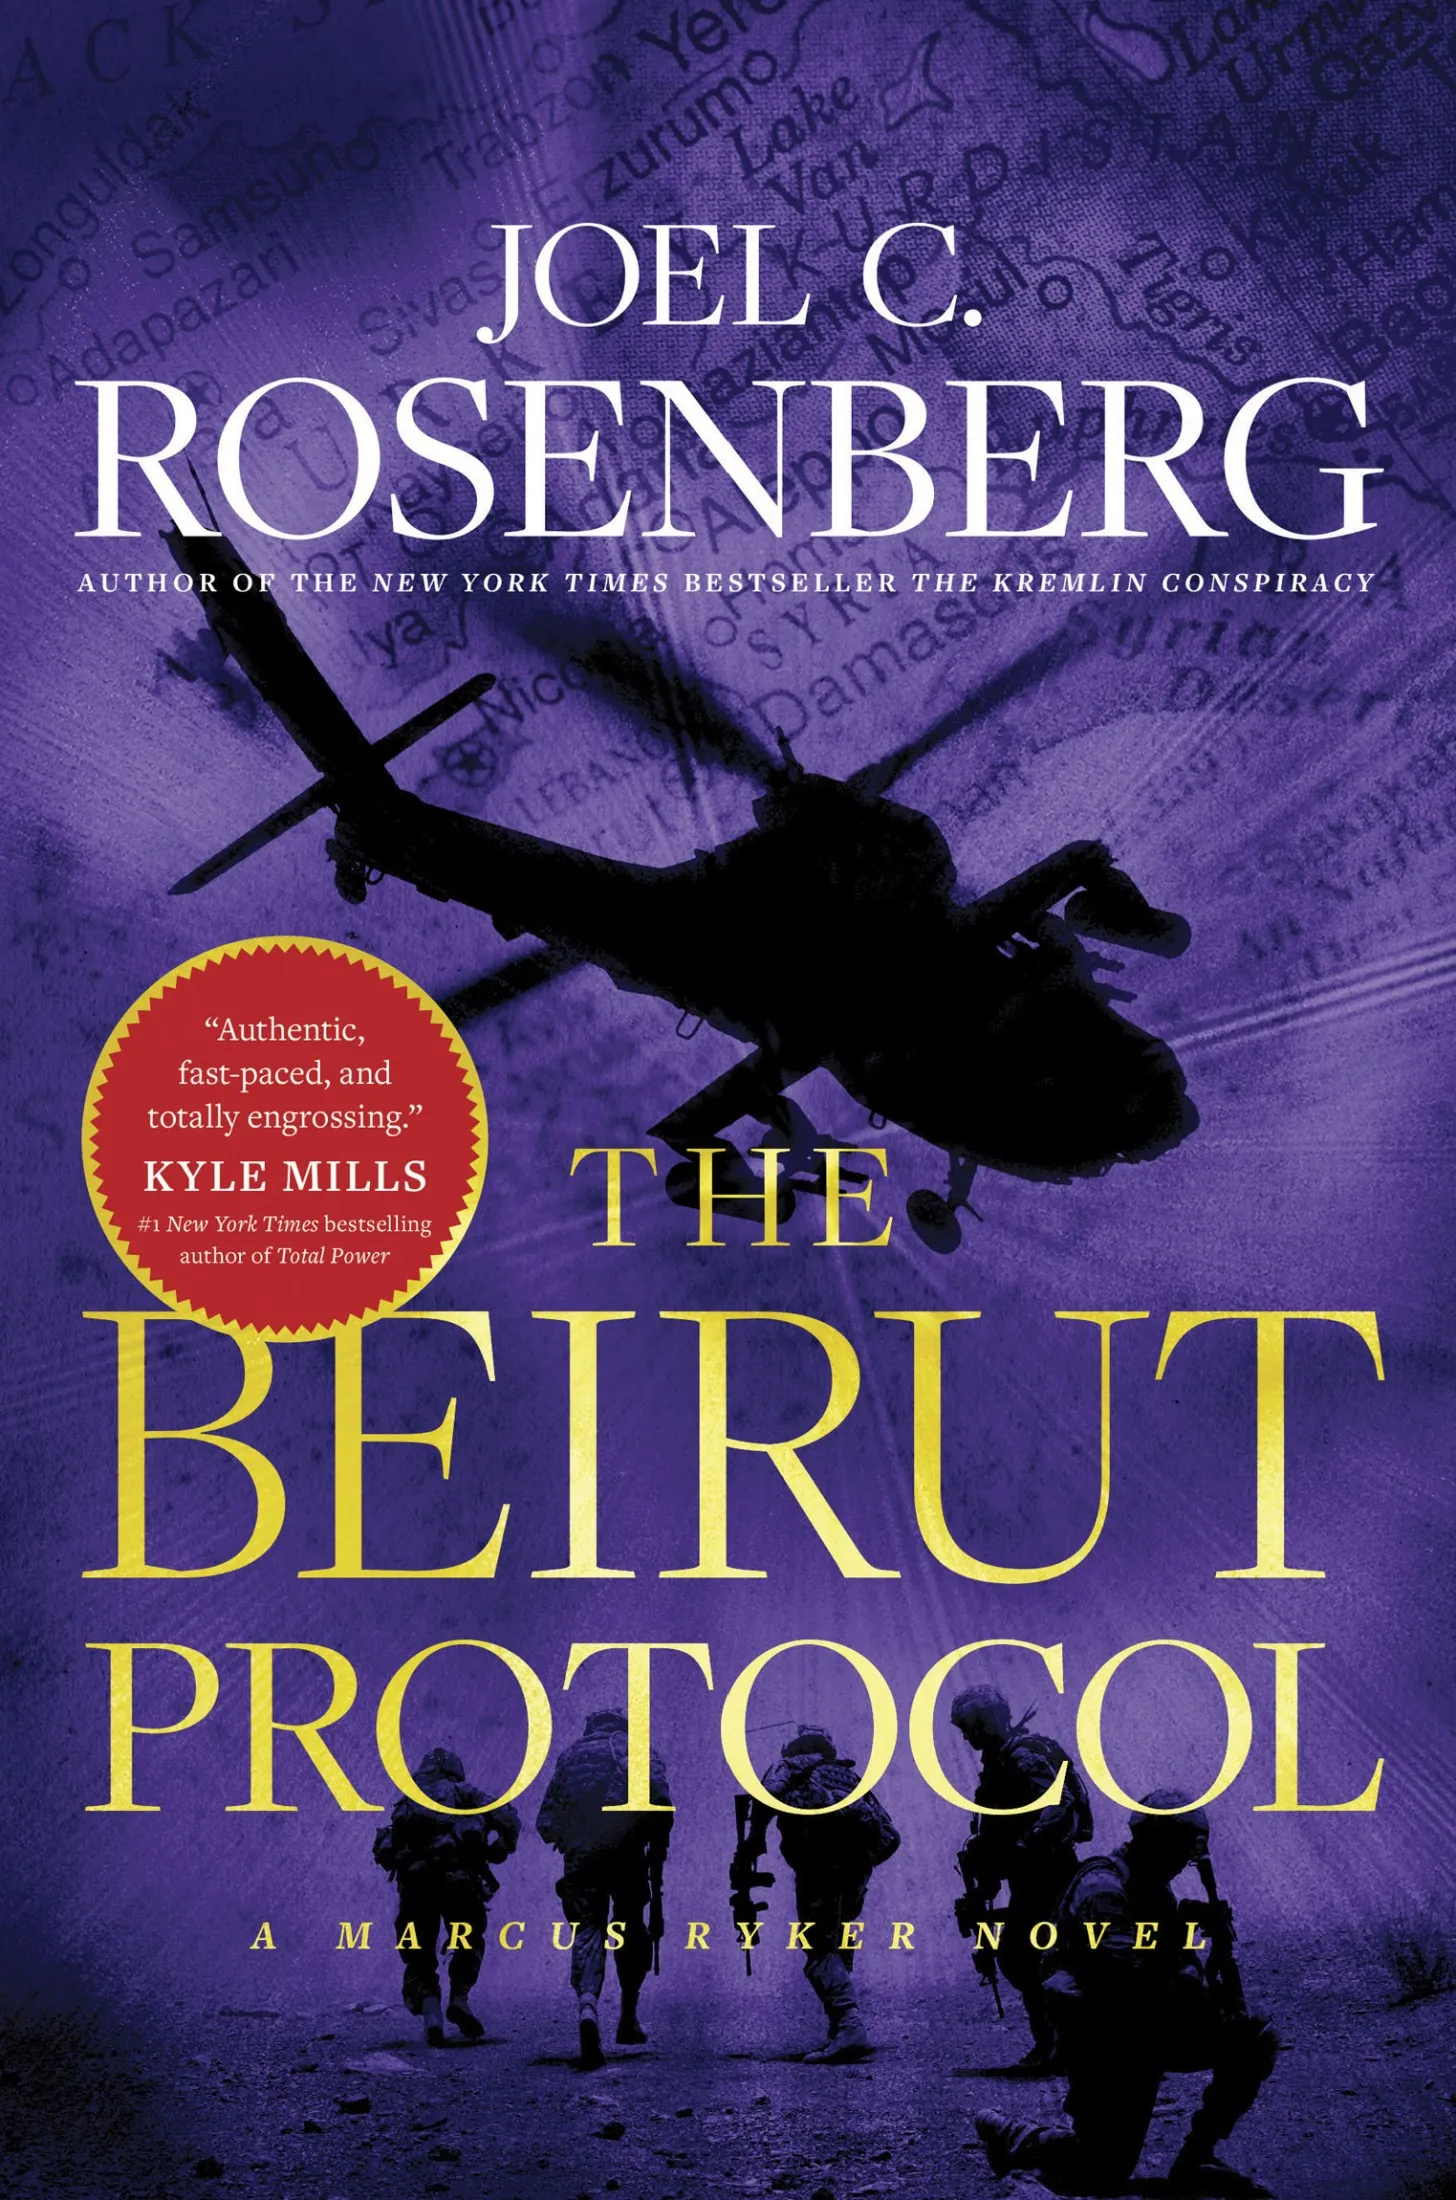 The Beirut Protocol (Marcus Ryker #4)